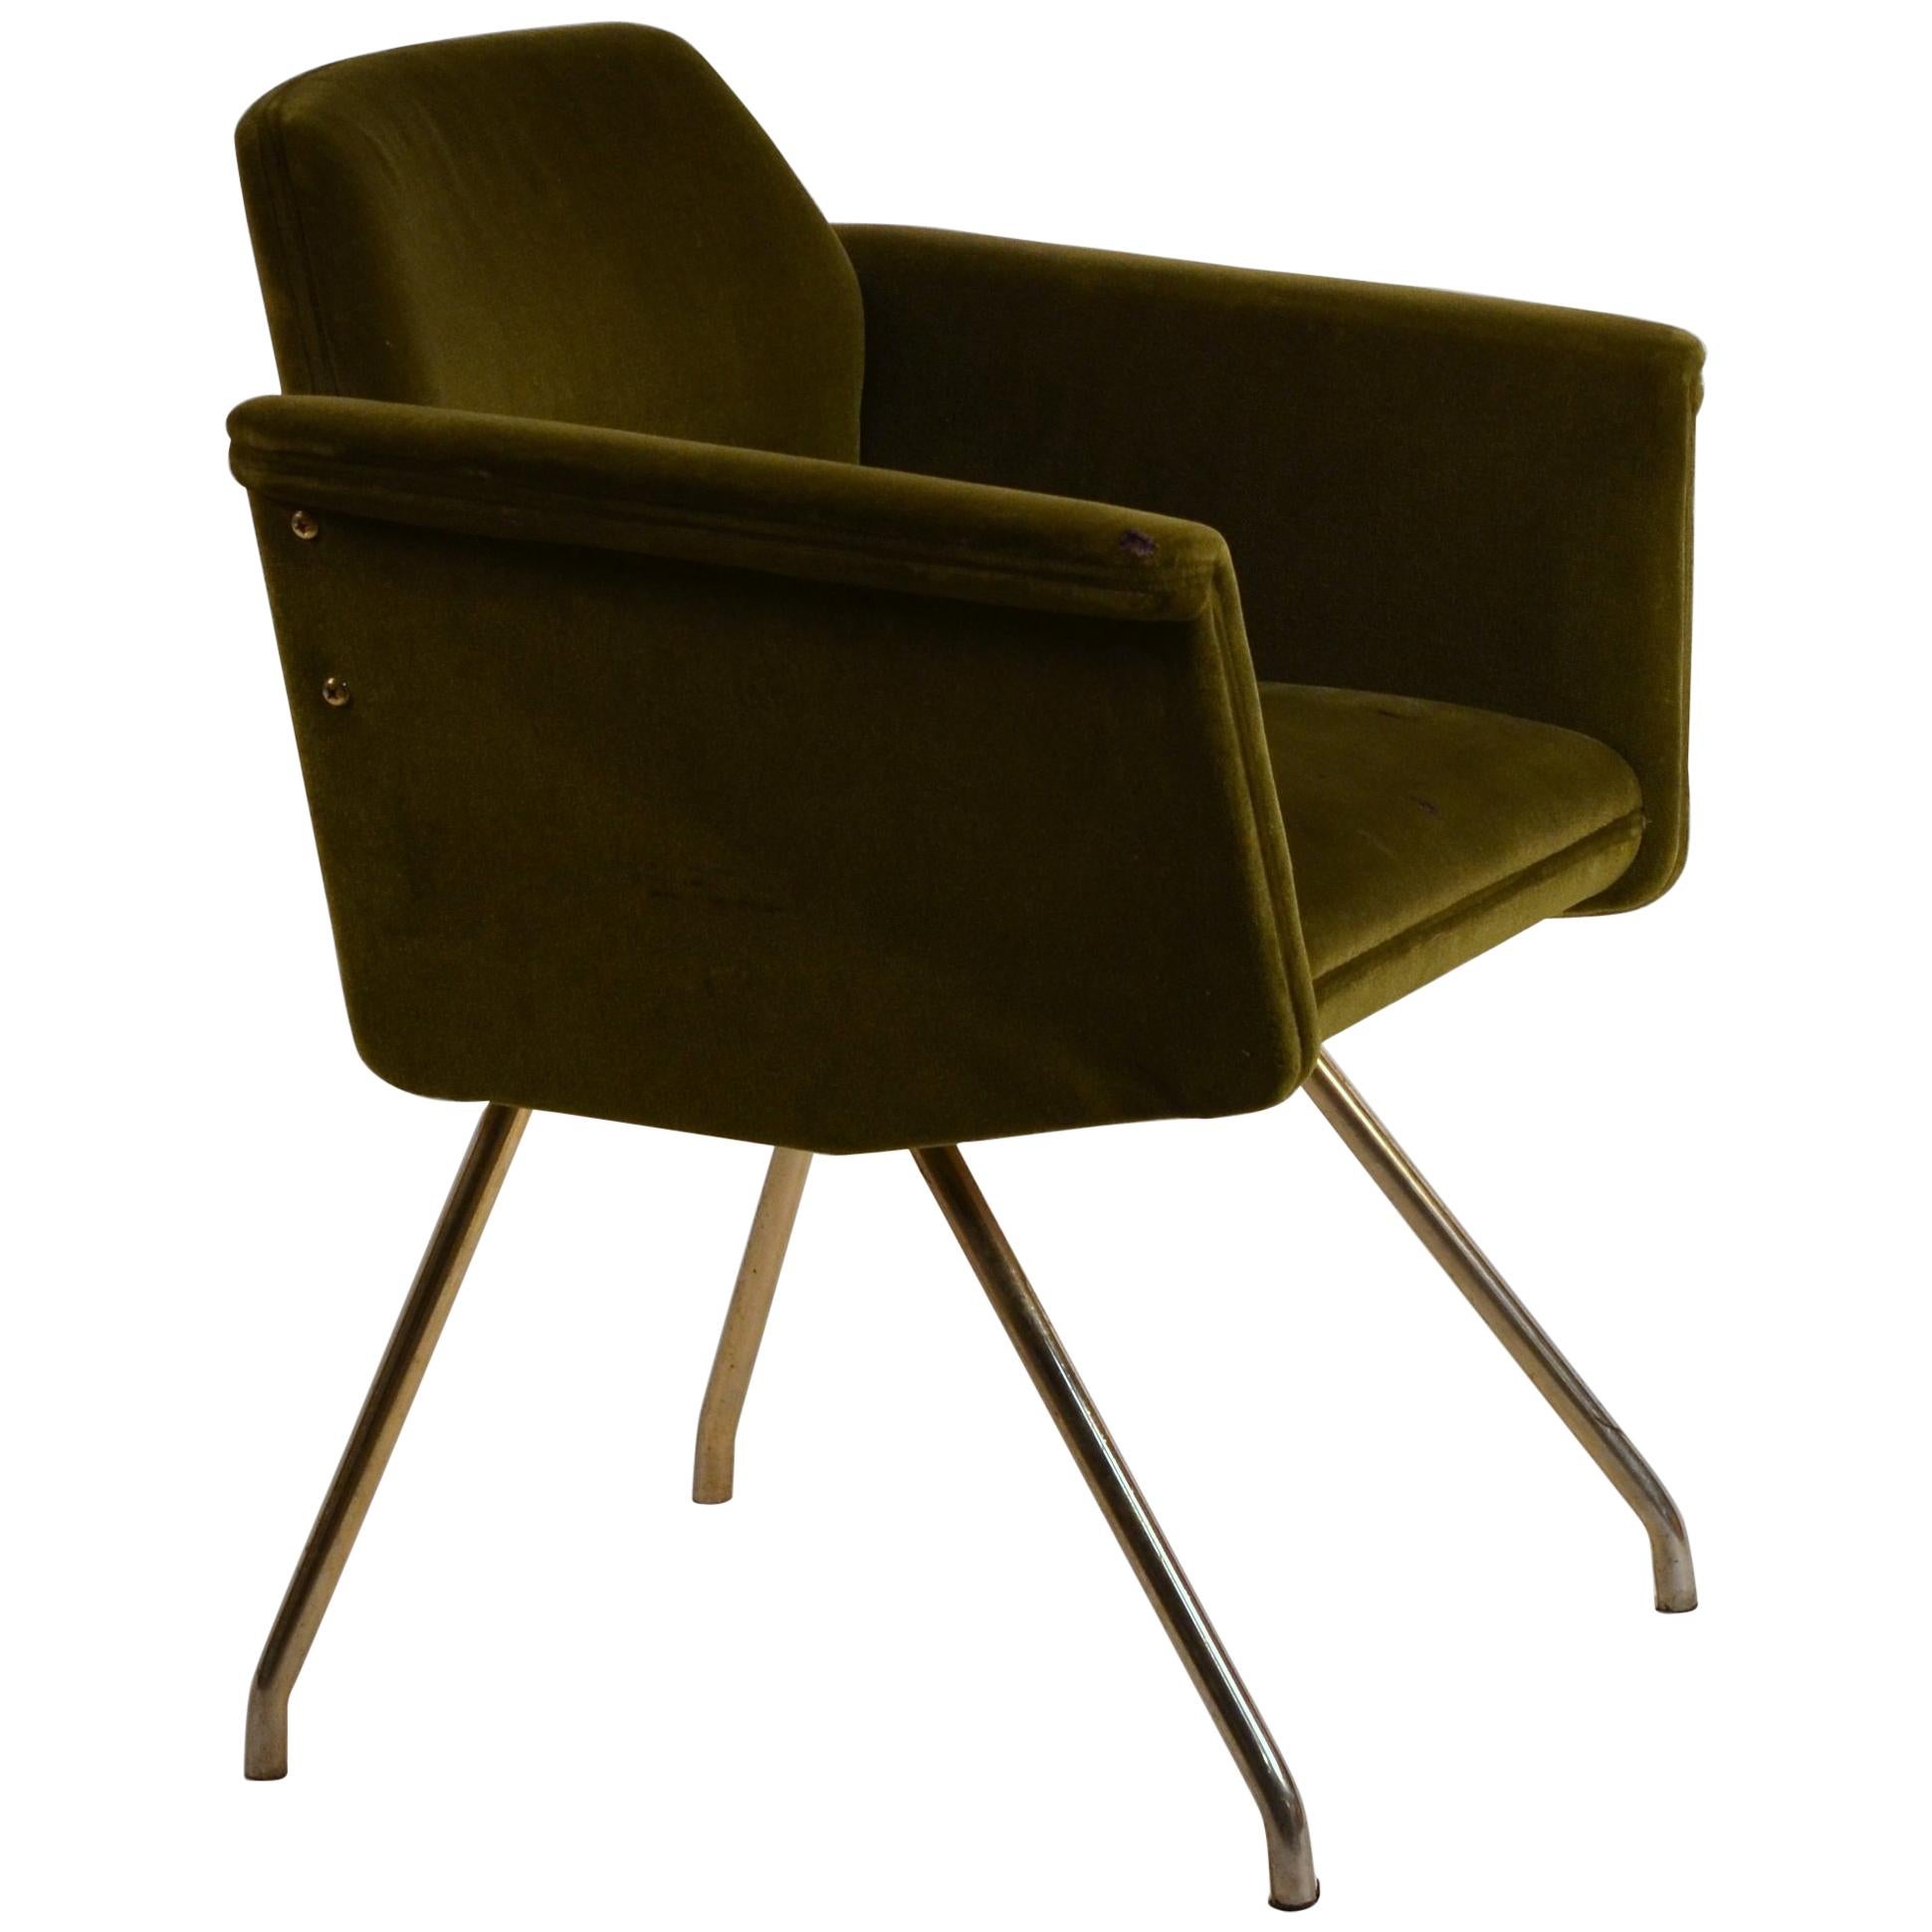 Chic French 1950s 'Prisme' Armchair by Joseph-André Motte